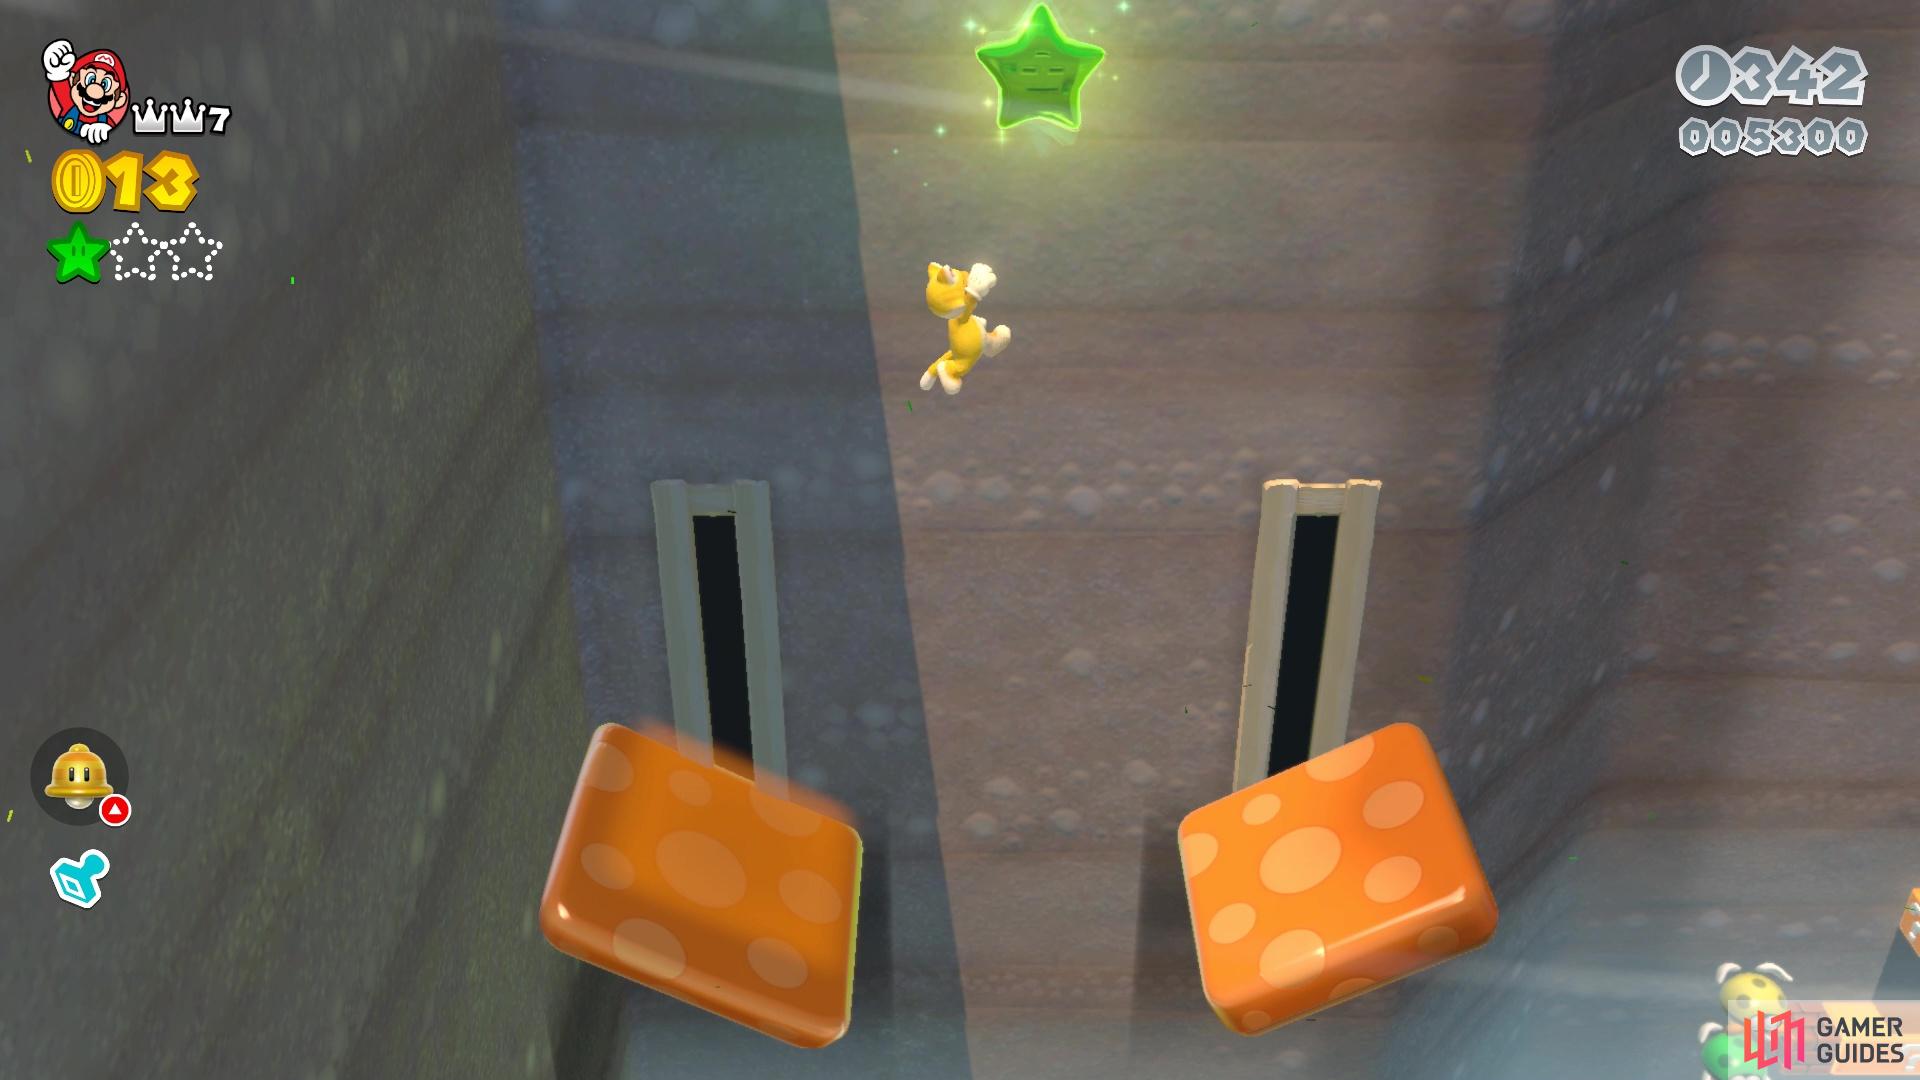 The second Green Star is up the small stairs right after the checkpoint